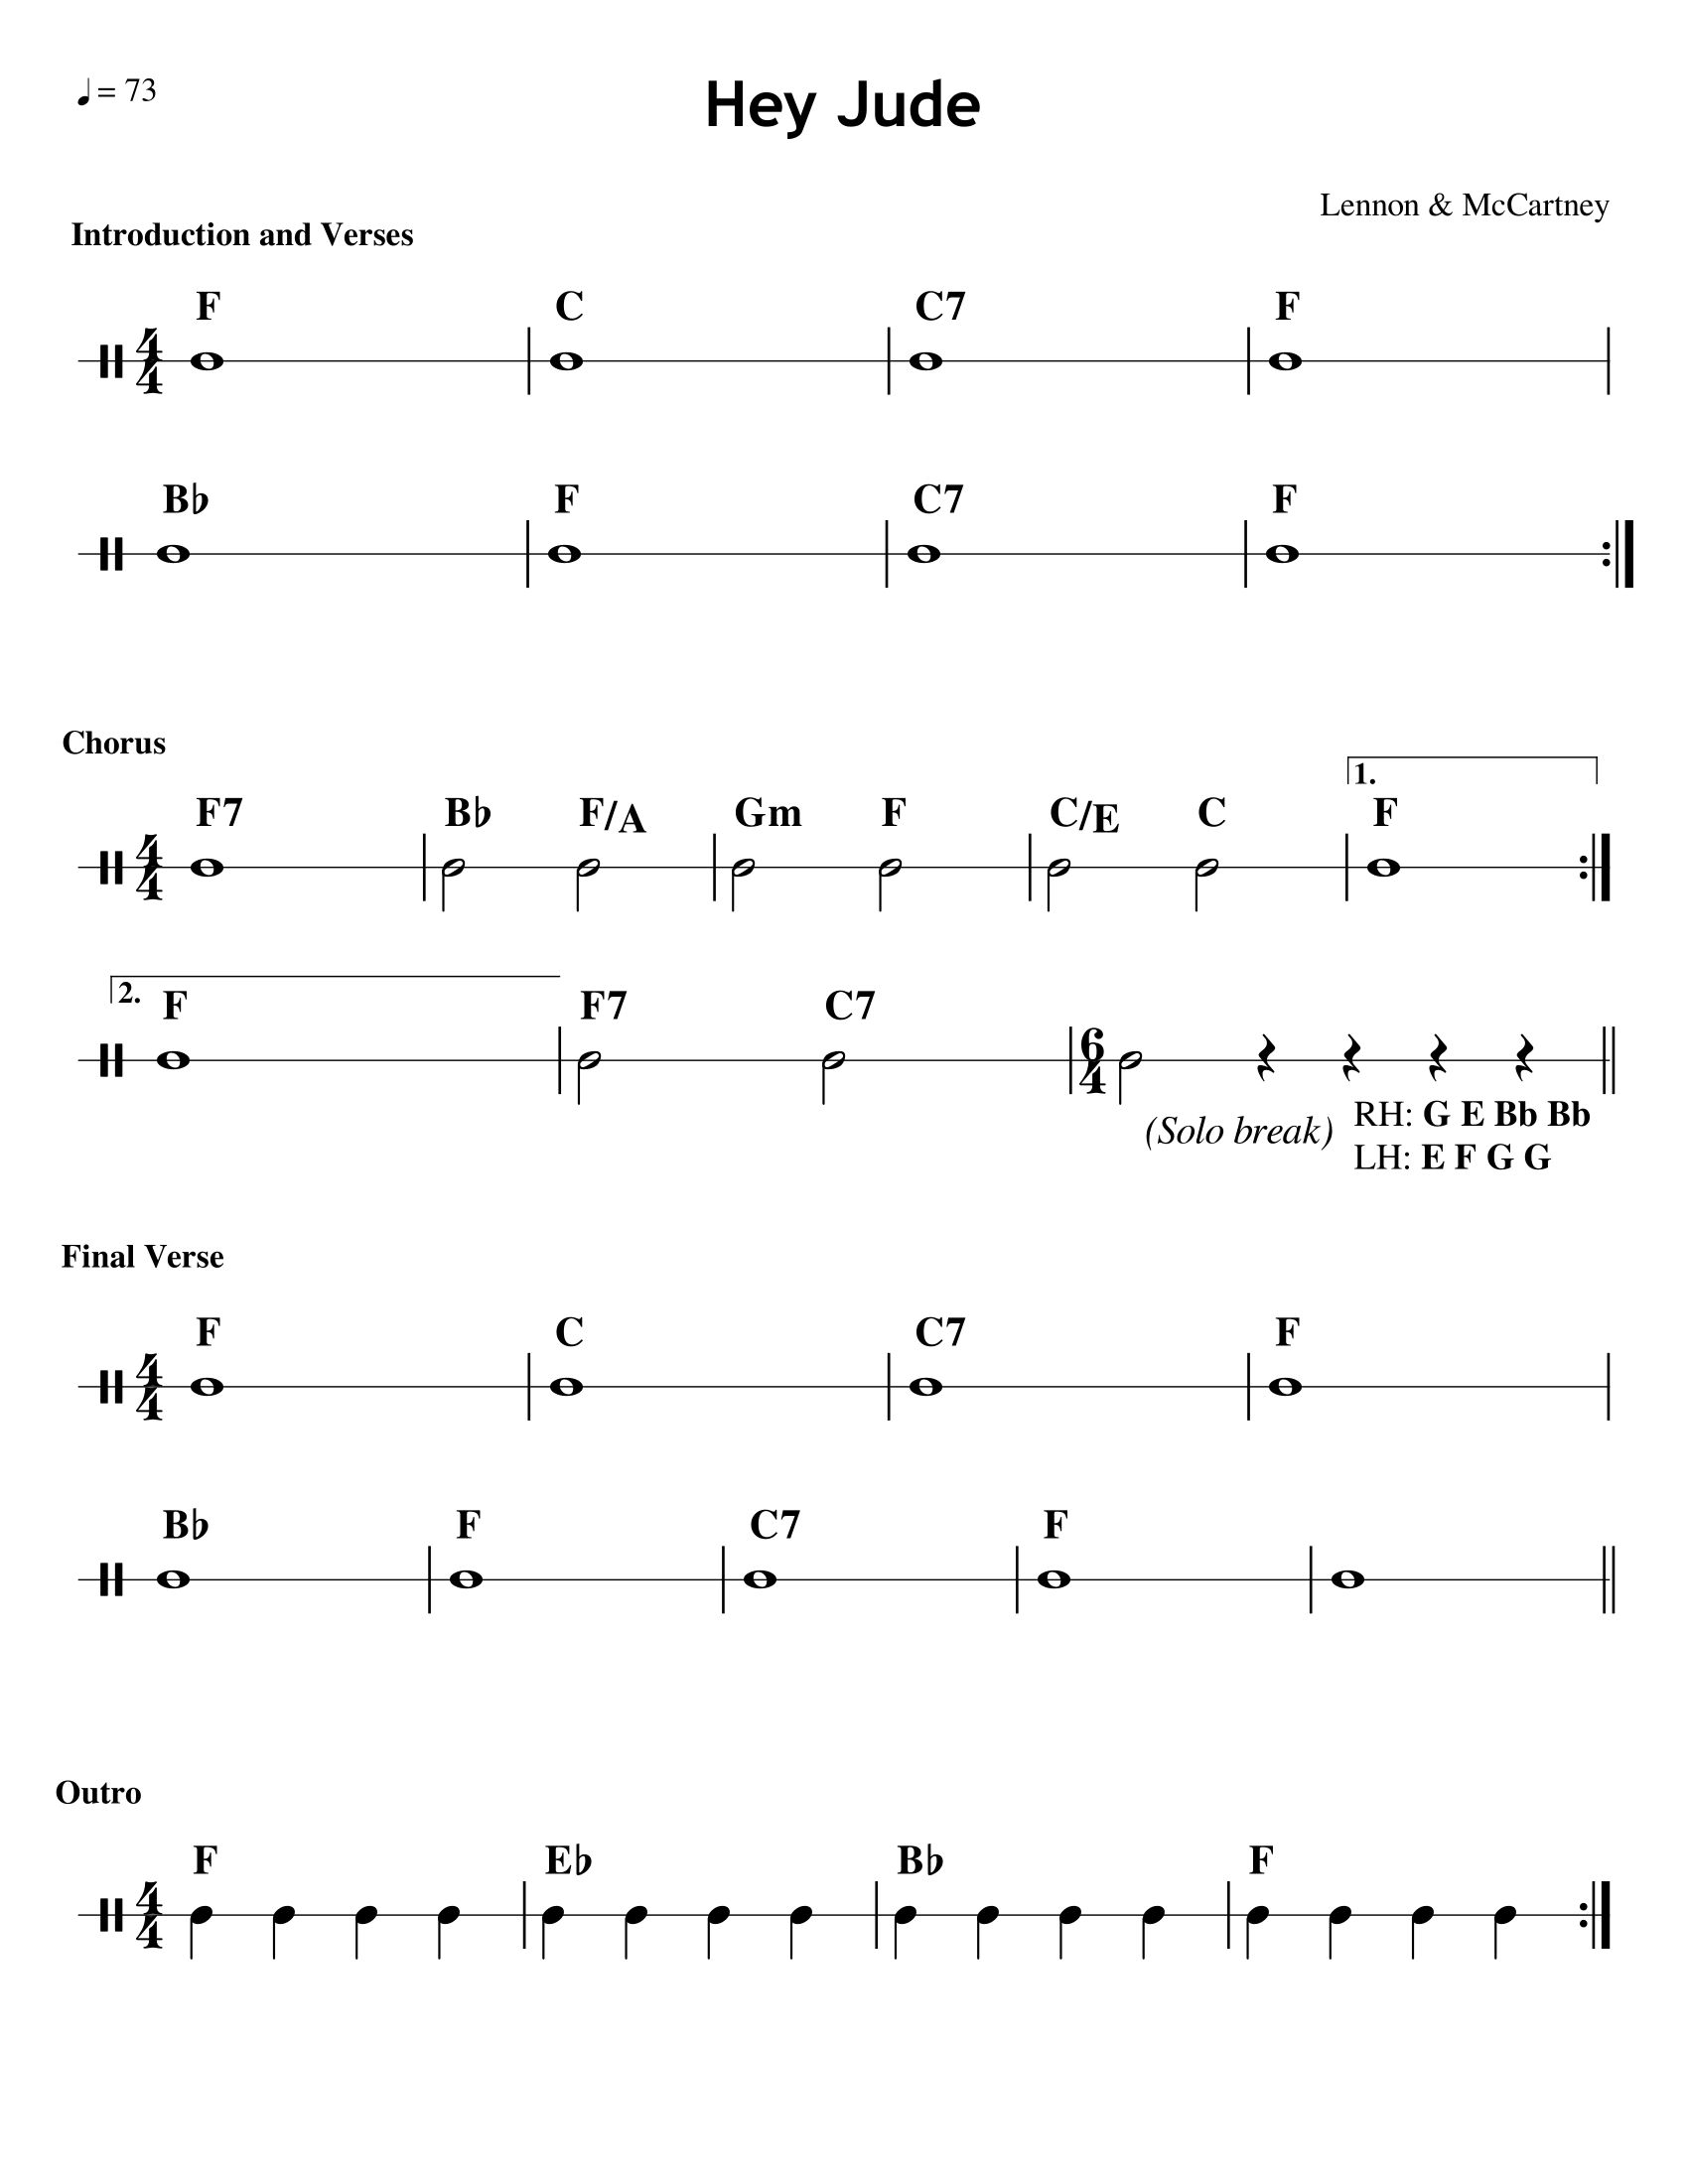 Hey Jude for guitar. Guitar sheet music and tabs.